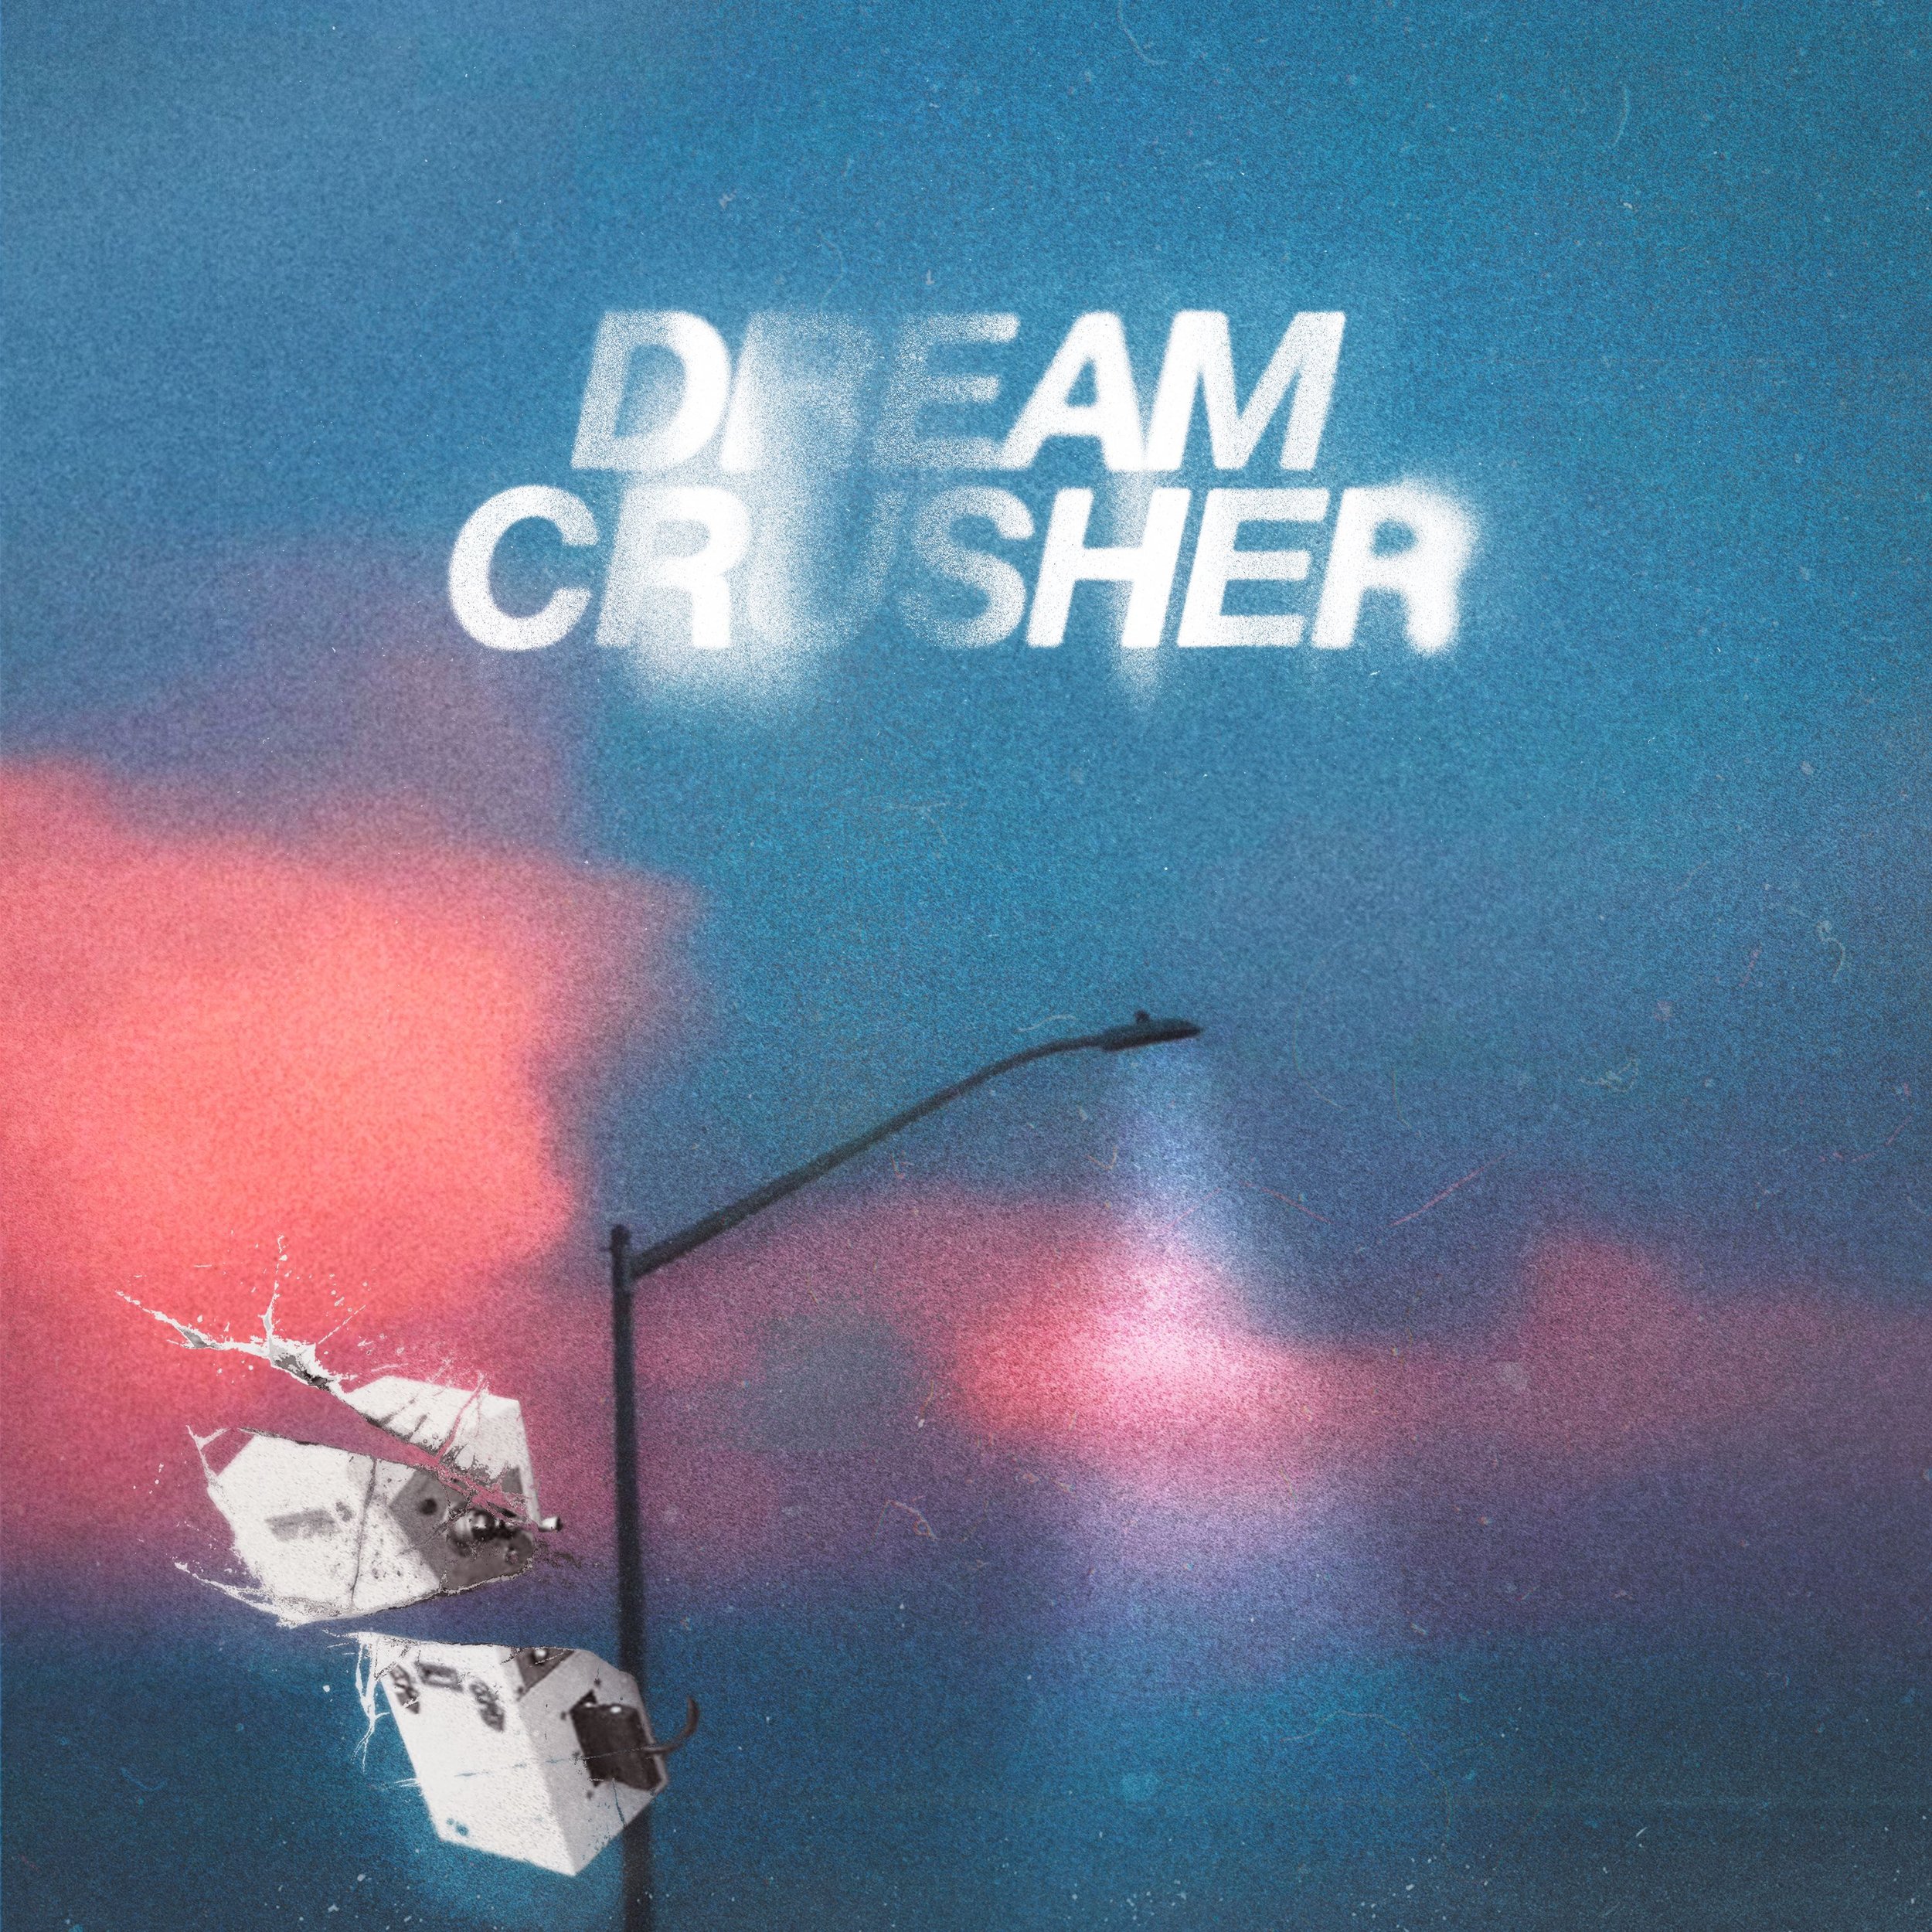 Dream Crusher by Quinn Mills hits all streaming platforms — MP Music House